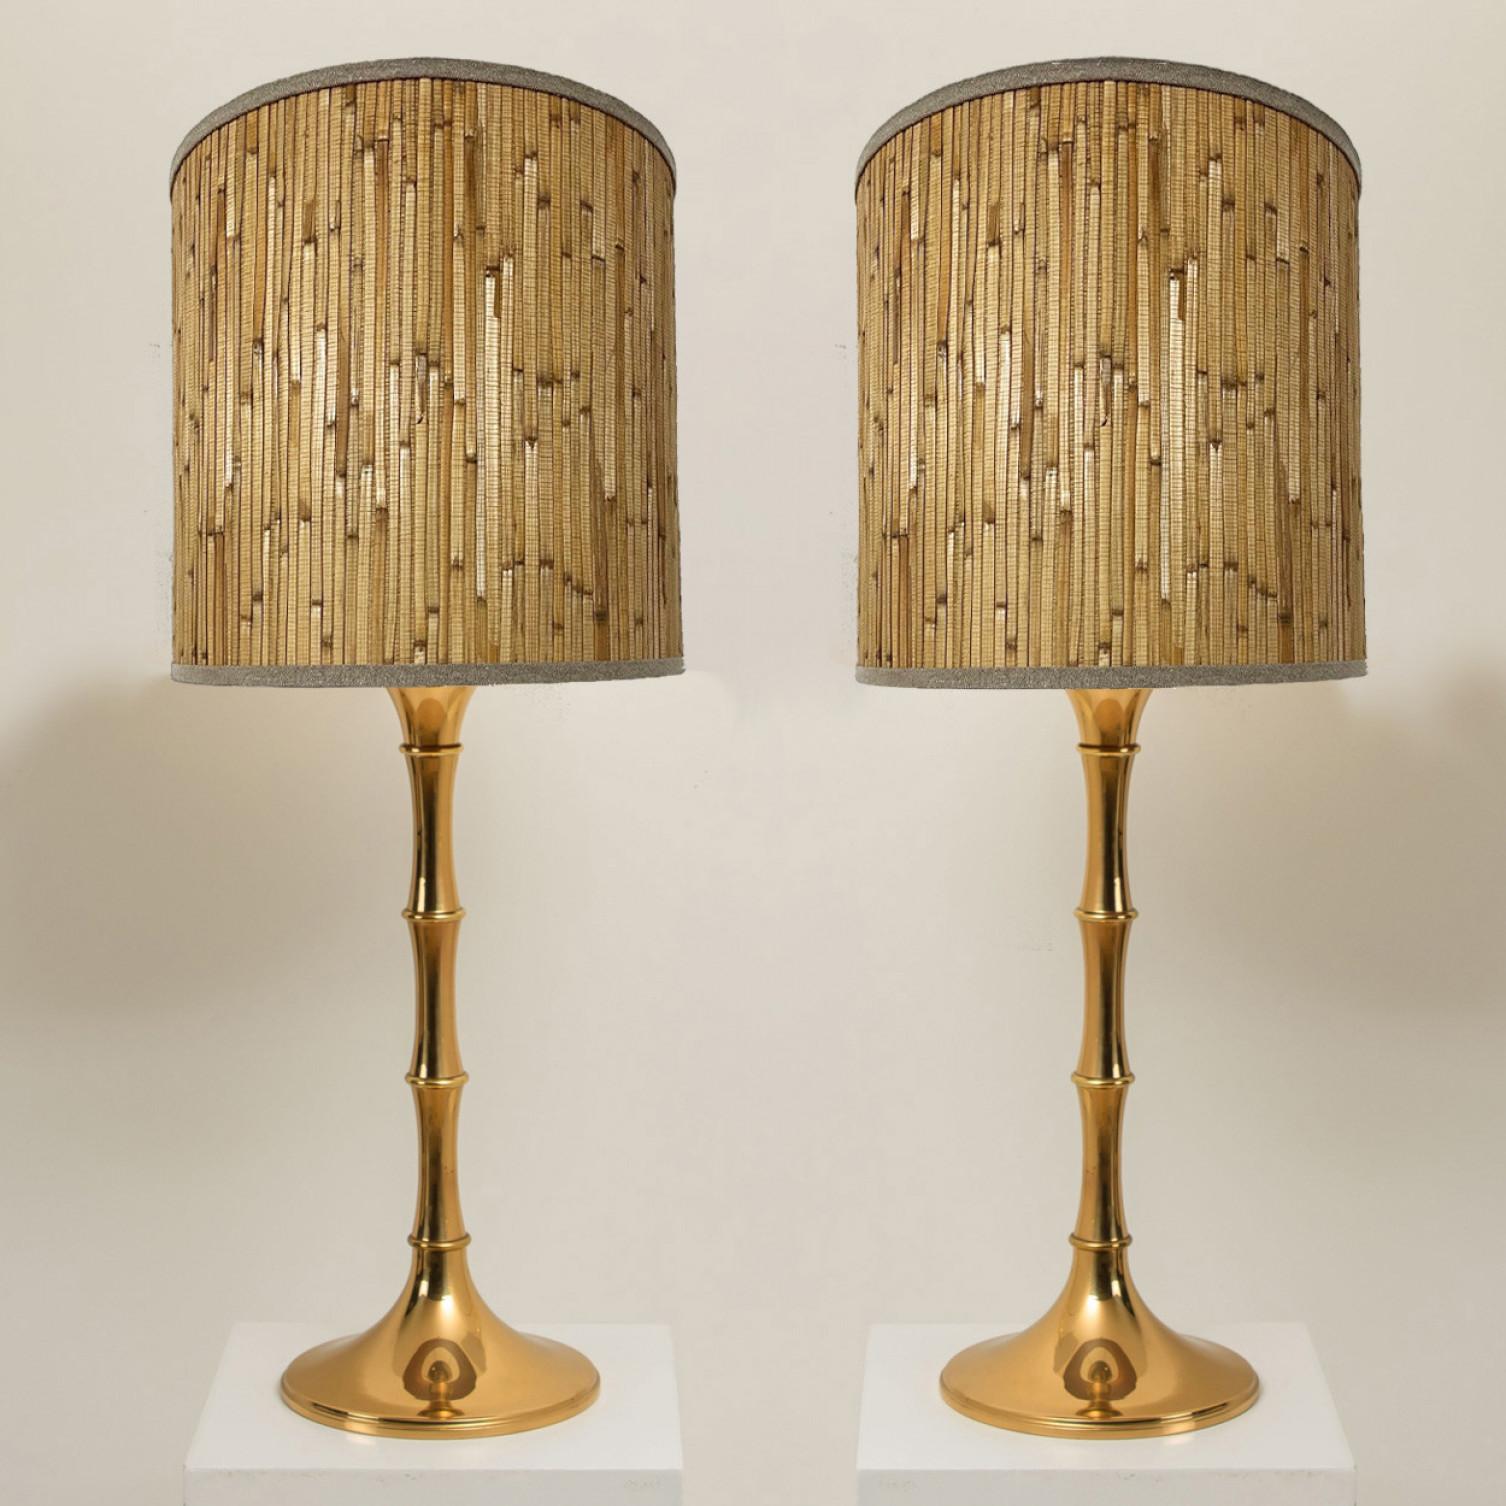 Other Pair of Table Lamps Gold Brass and Bamboo Shade by Ingo Maurer, Germany, 1968 For Sale